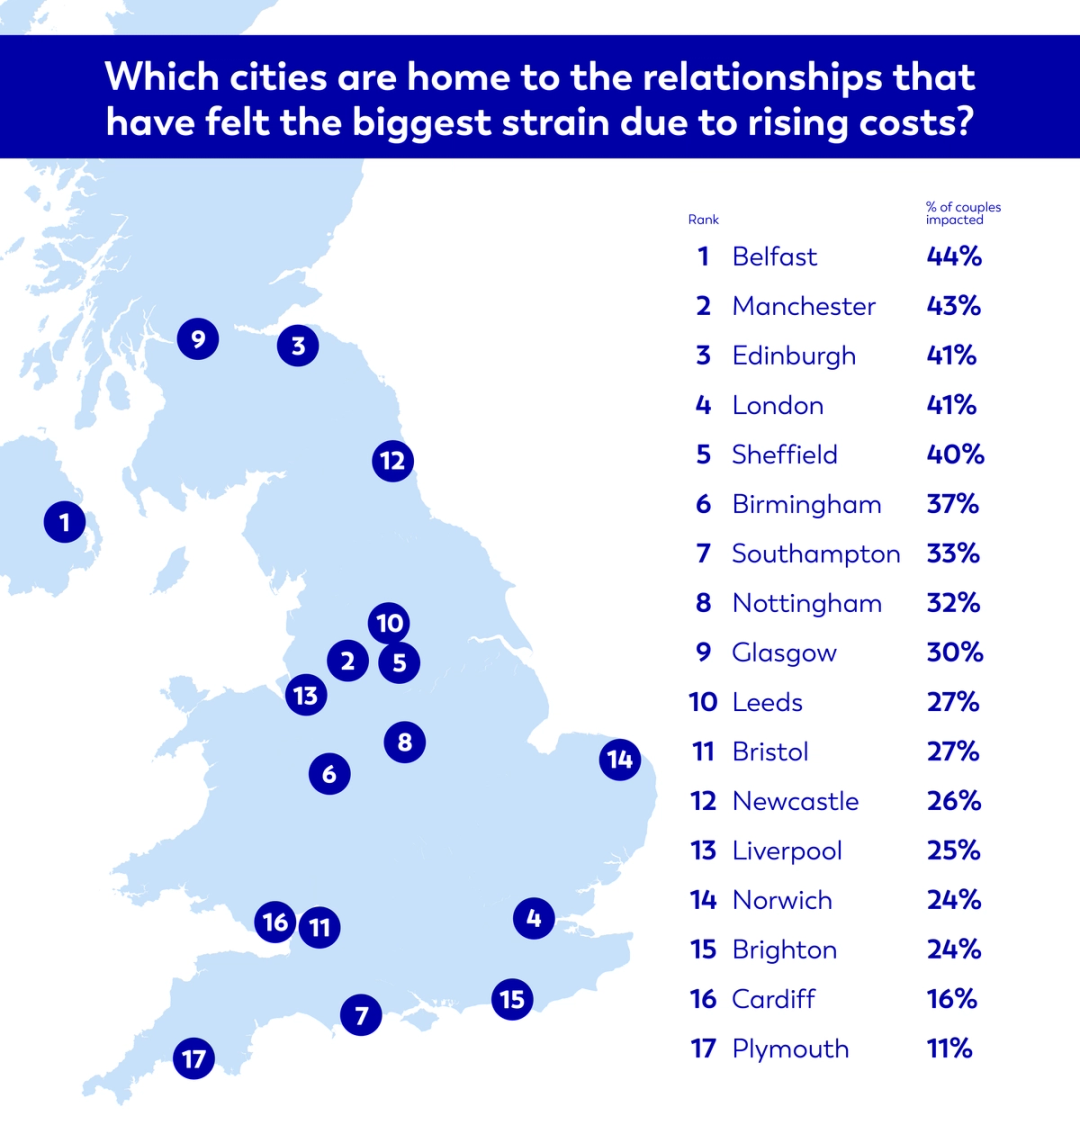 Infographic map of UK showing cities where rising costs have put the most strain on relationships